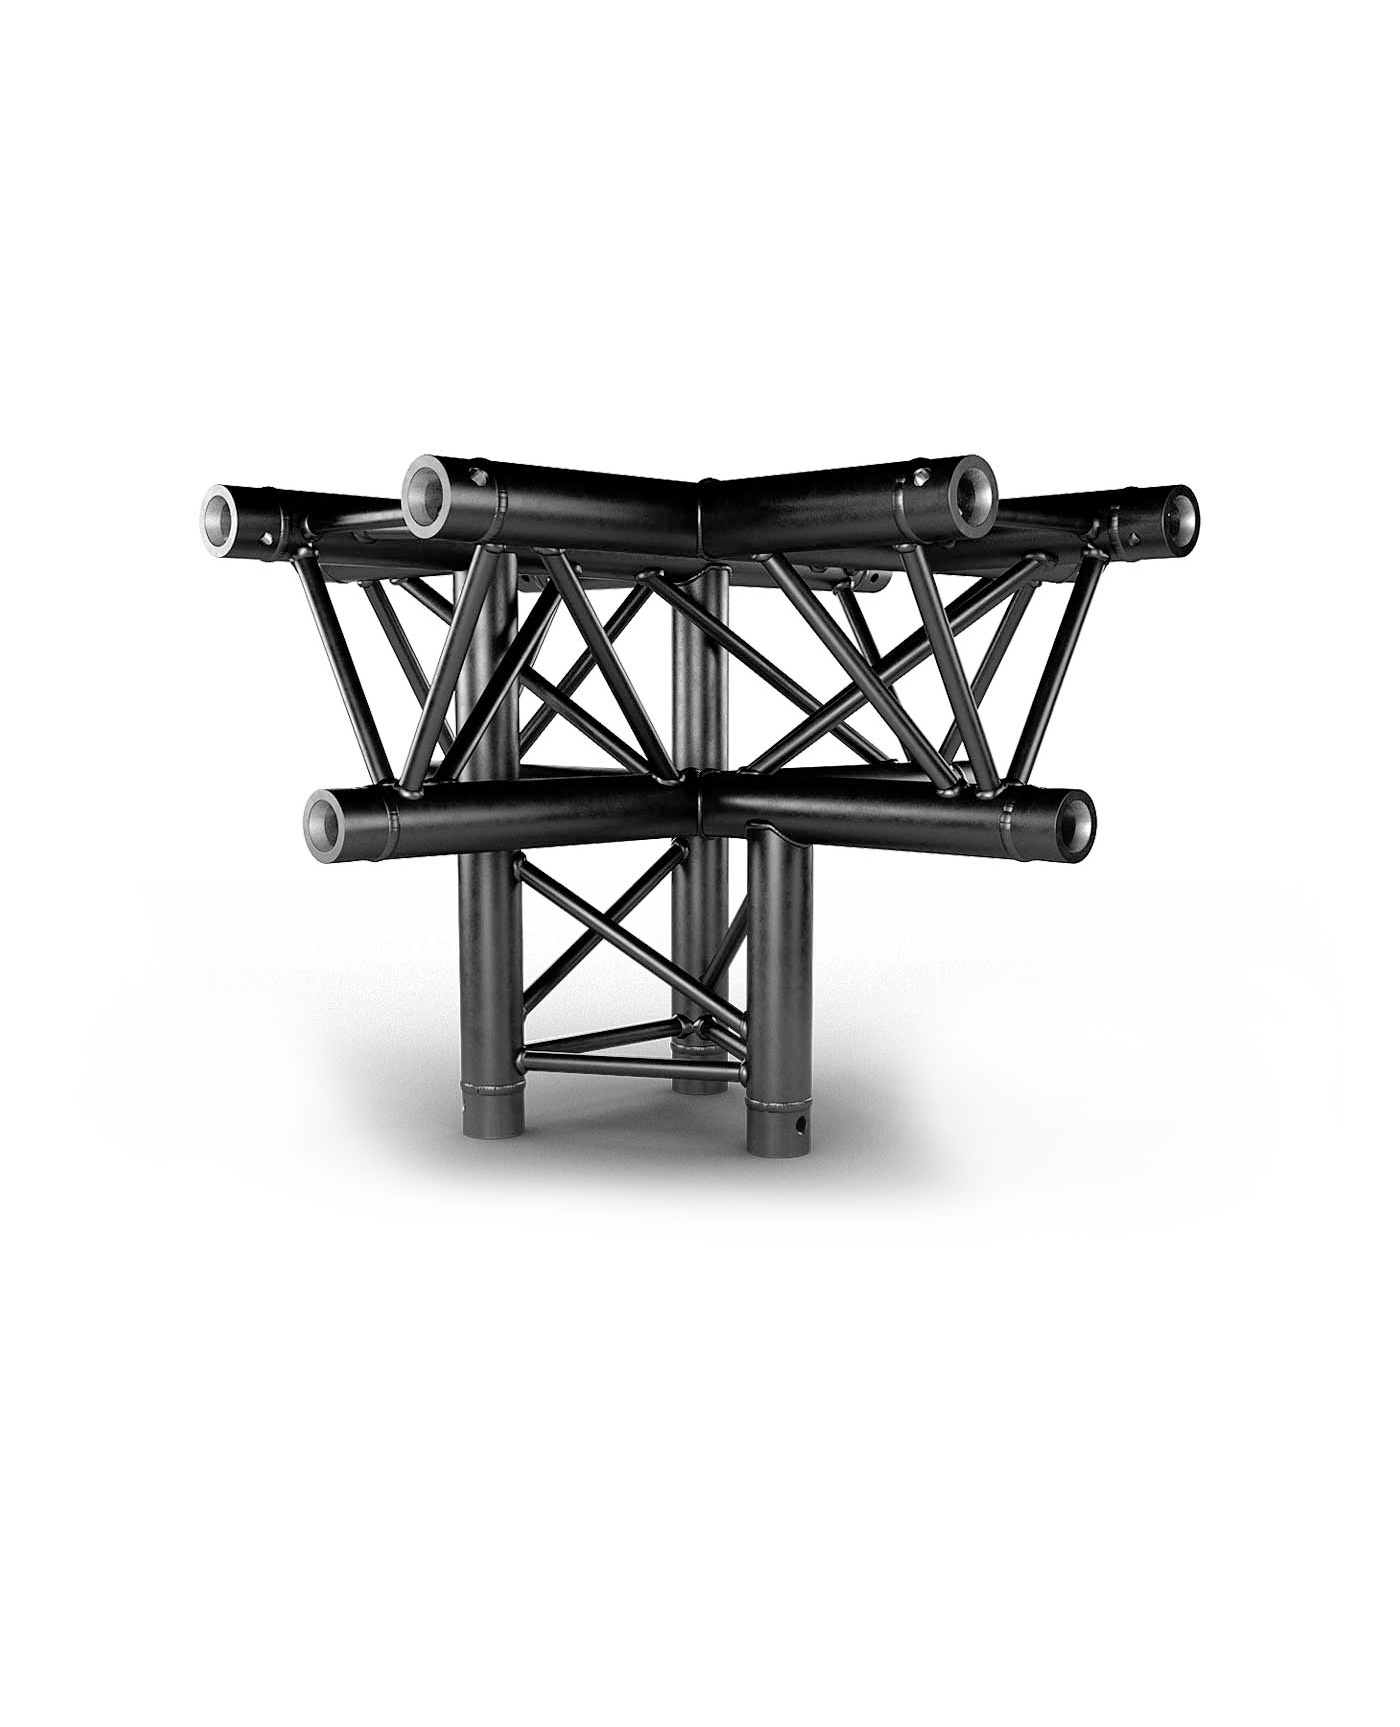 TRUSS TRIO 290 angle - Black - 90- - 3 directions - Top bottom right - Connection kits included